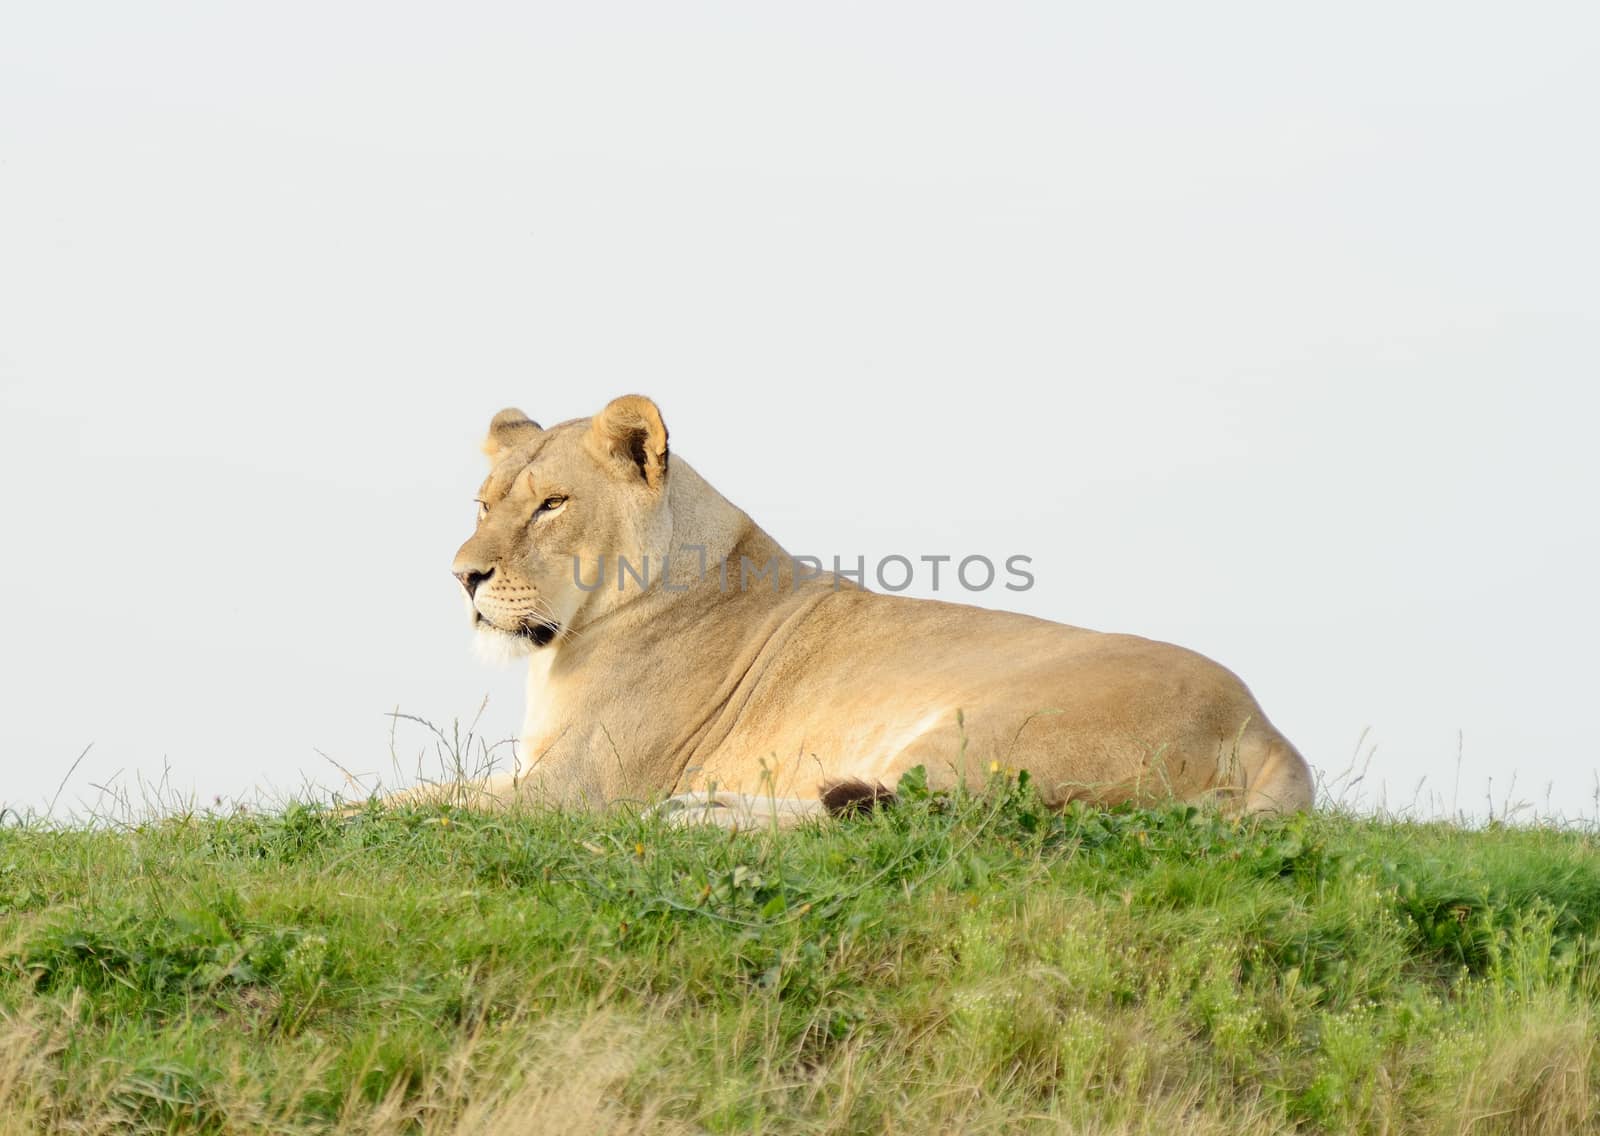 Lioness laying on grass looking alert and staring